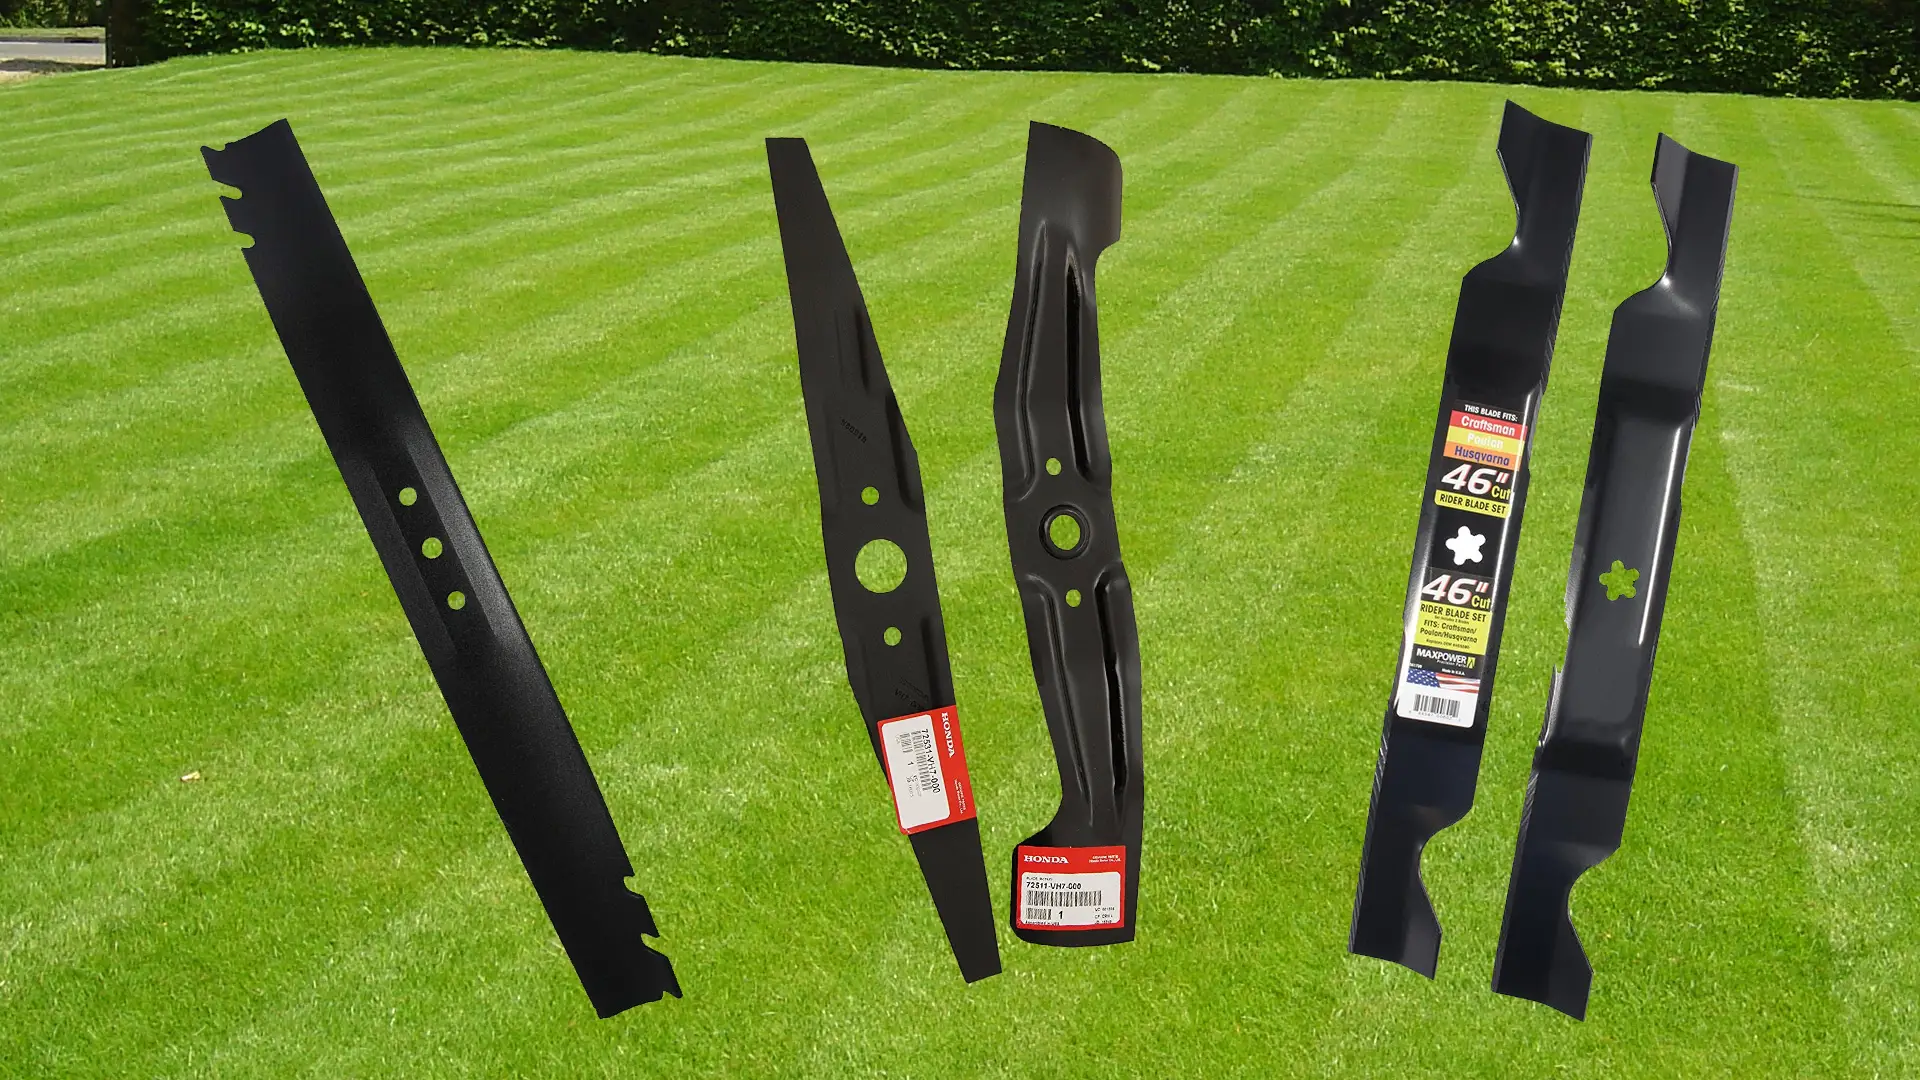 Top 10 Best Lawn Mower Blades: 2020 Reviews & Buying Guide